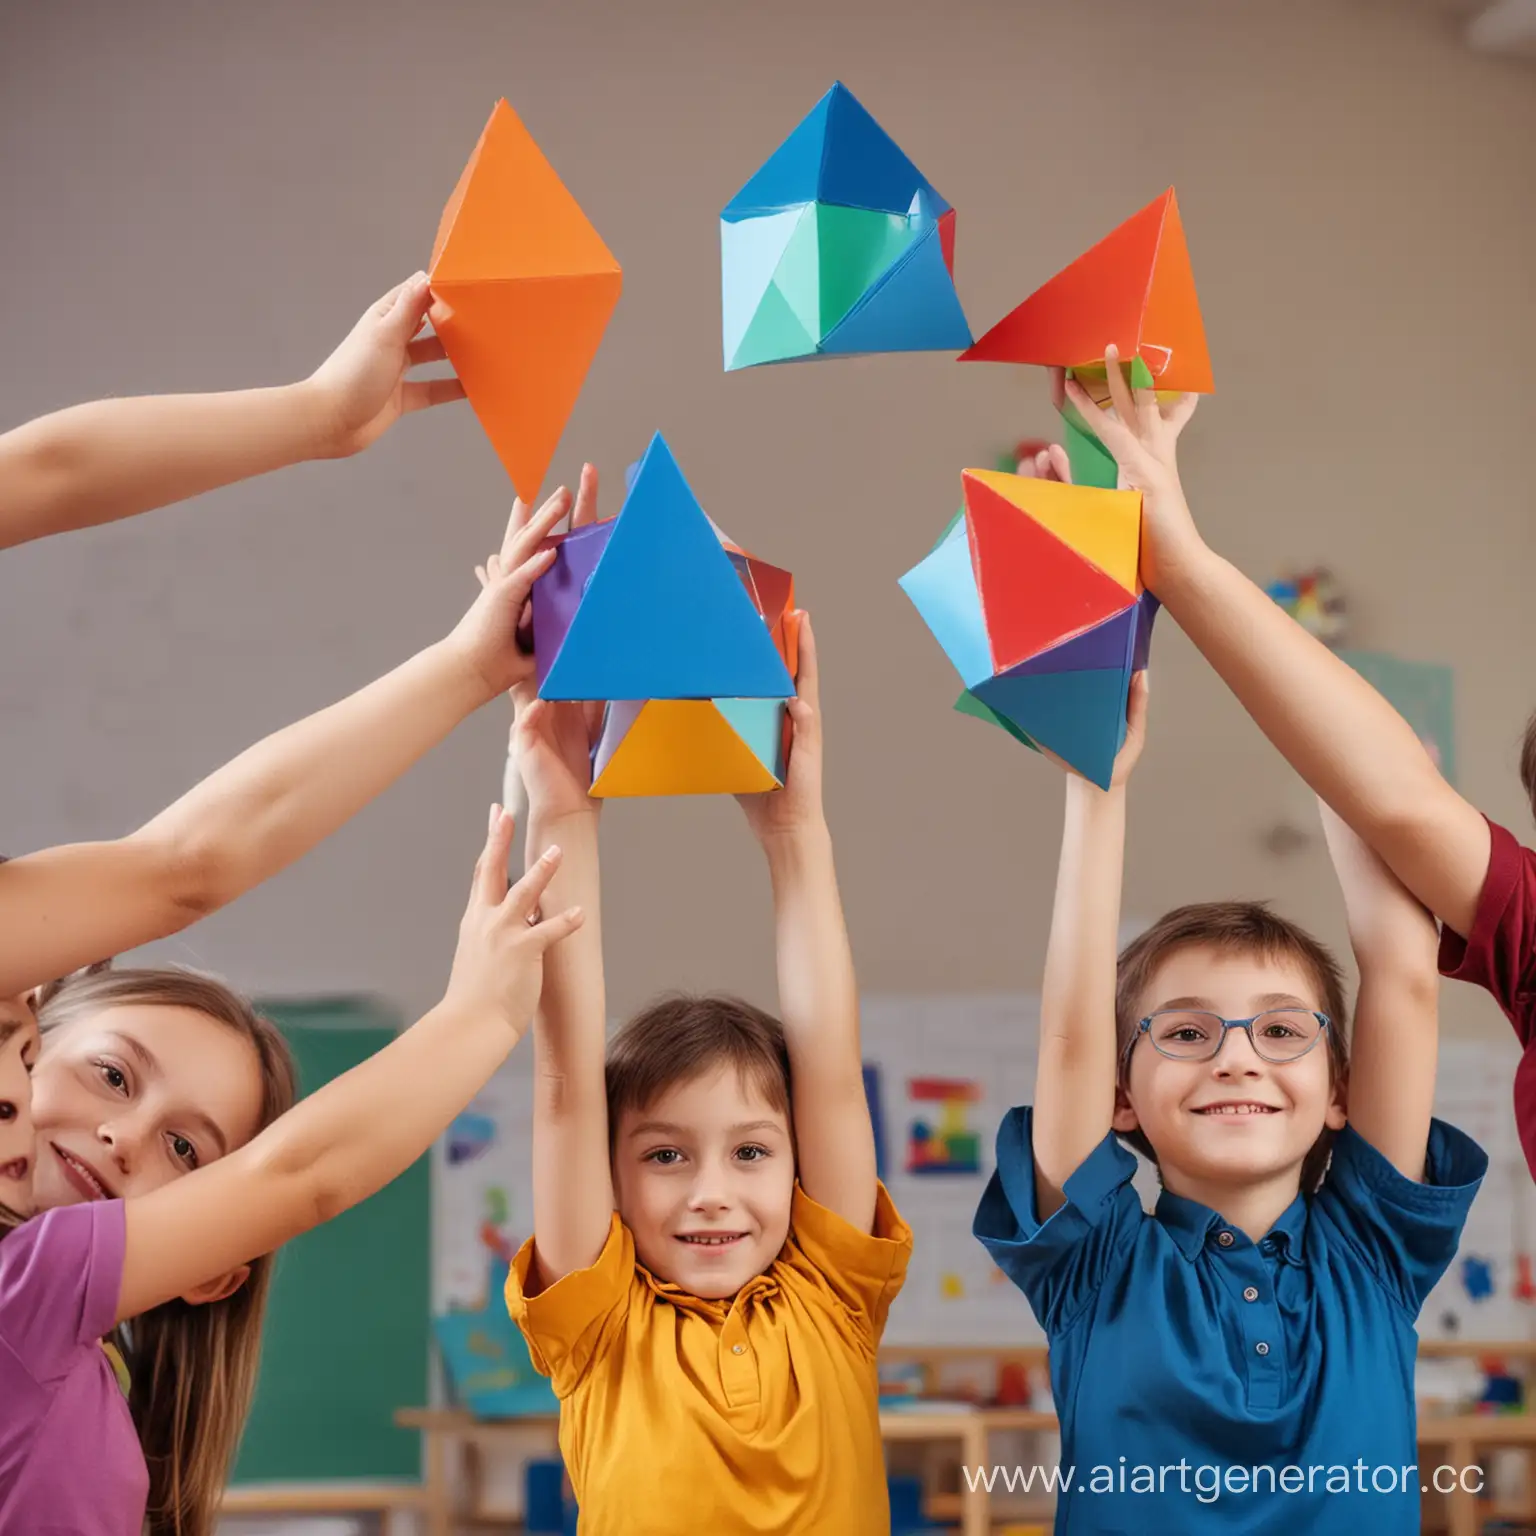 Diverse-Children-Holding-Colorful-Geometric-Shapes-in-Classroom